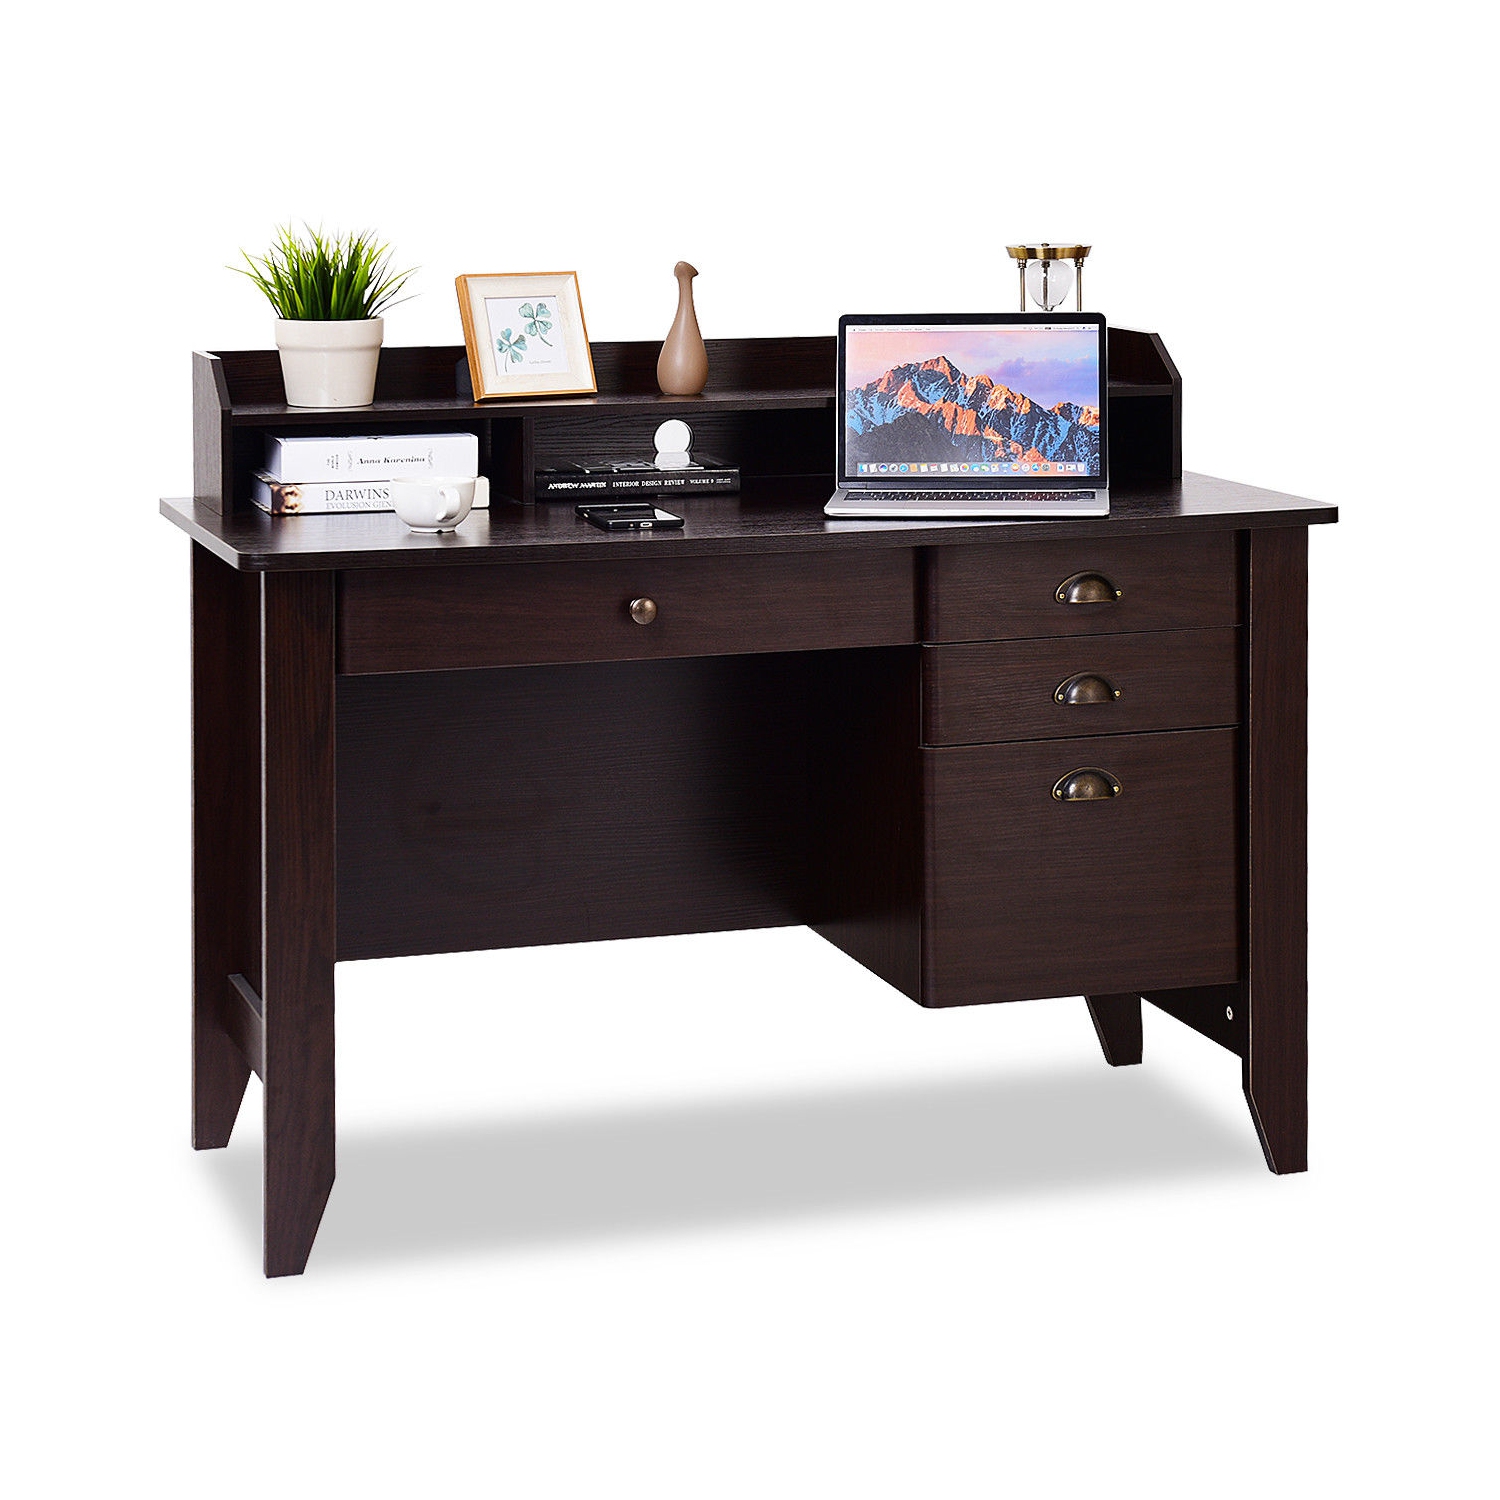 Costway Computer Desk PC Laptop Writing Table Workstation Student Study Furniture Brown